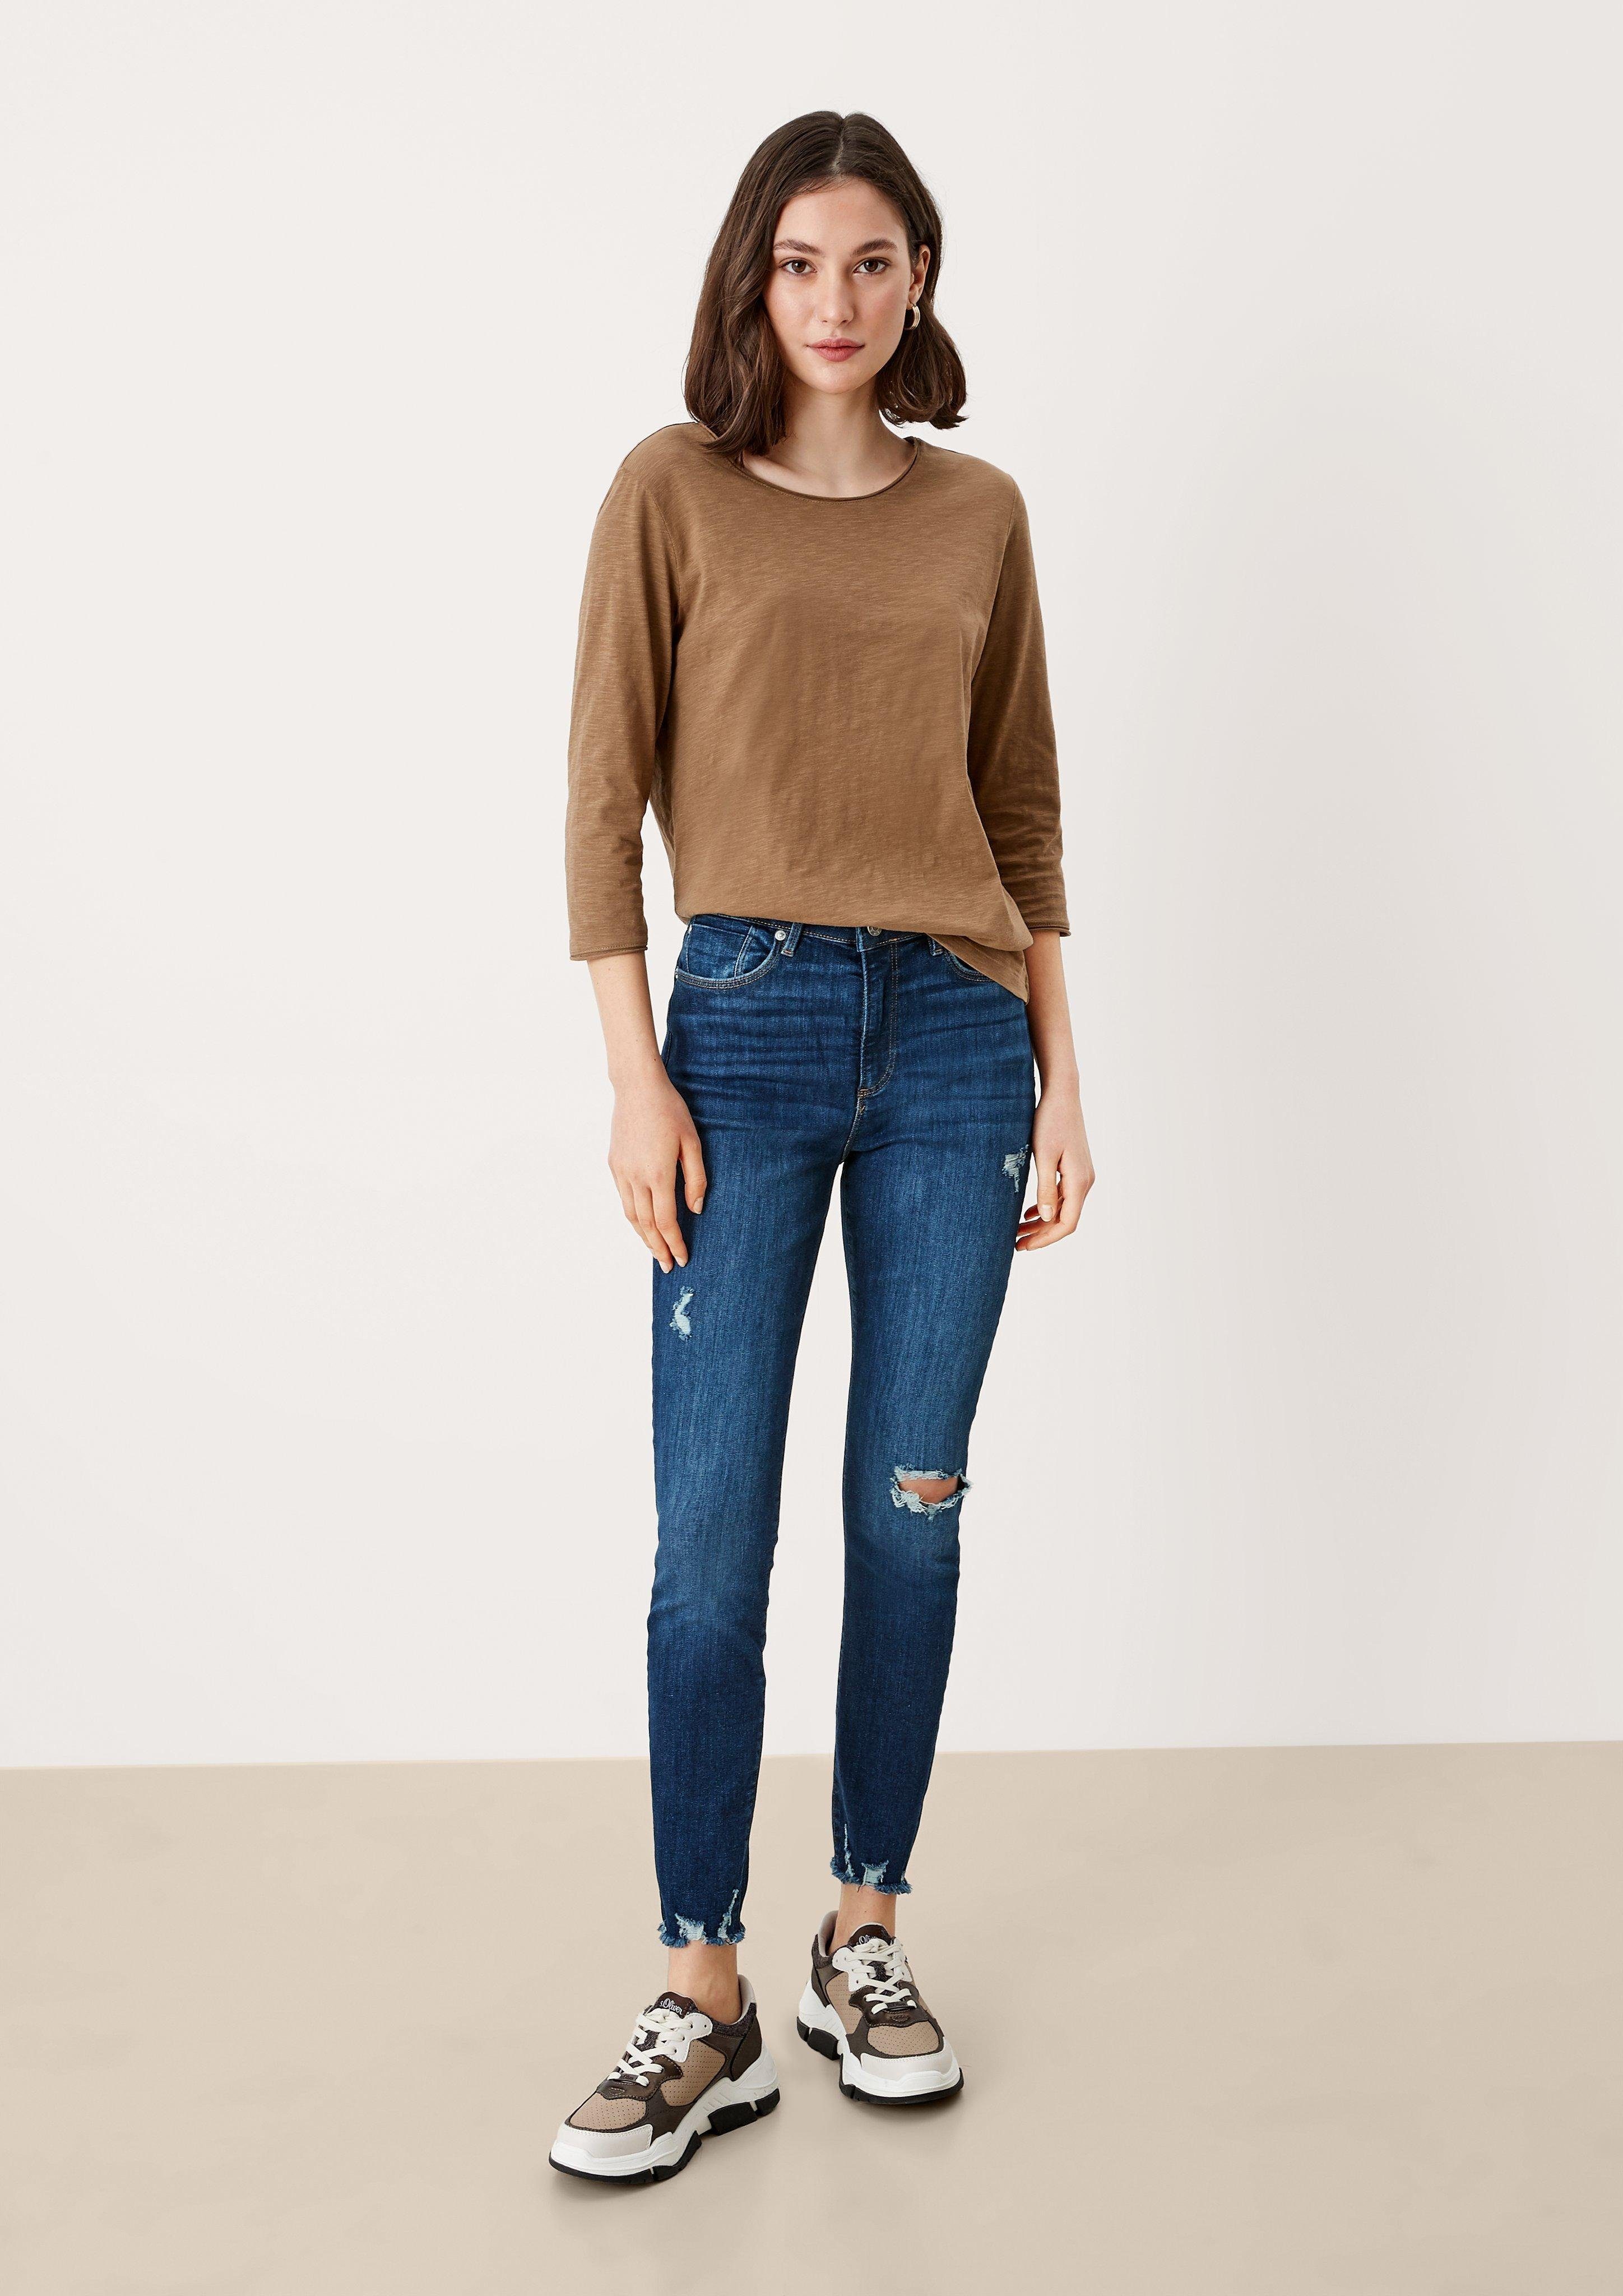 s.Oliver 7/8-Jeans Ankle-Jeans Izabell / Skinny Fit / Mid Rise / Skinny Leg Destroyes, Waschung